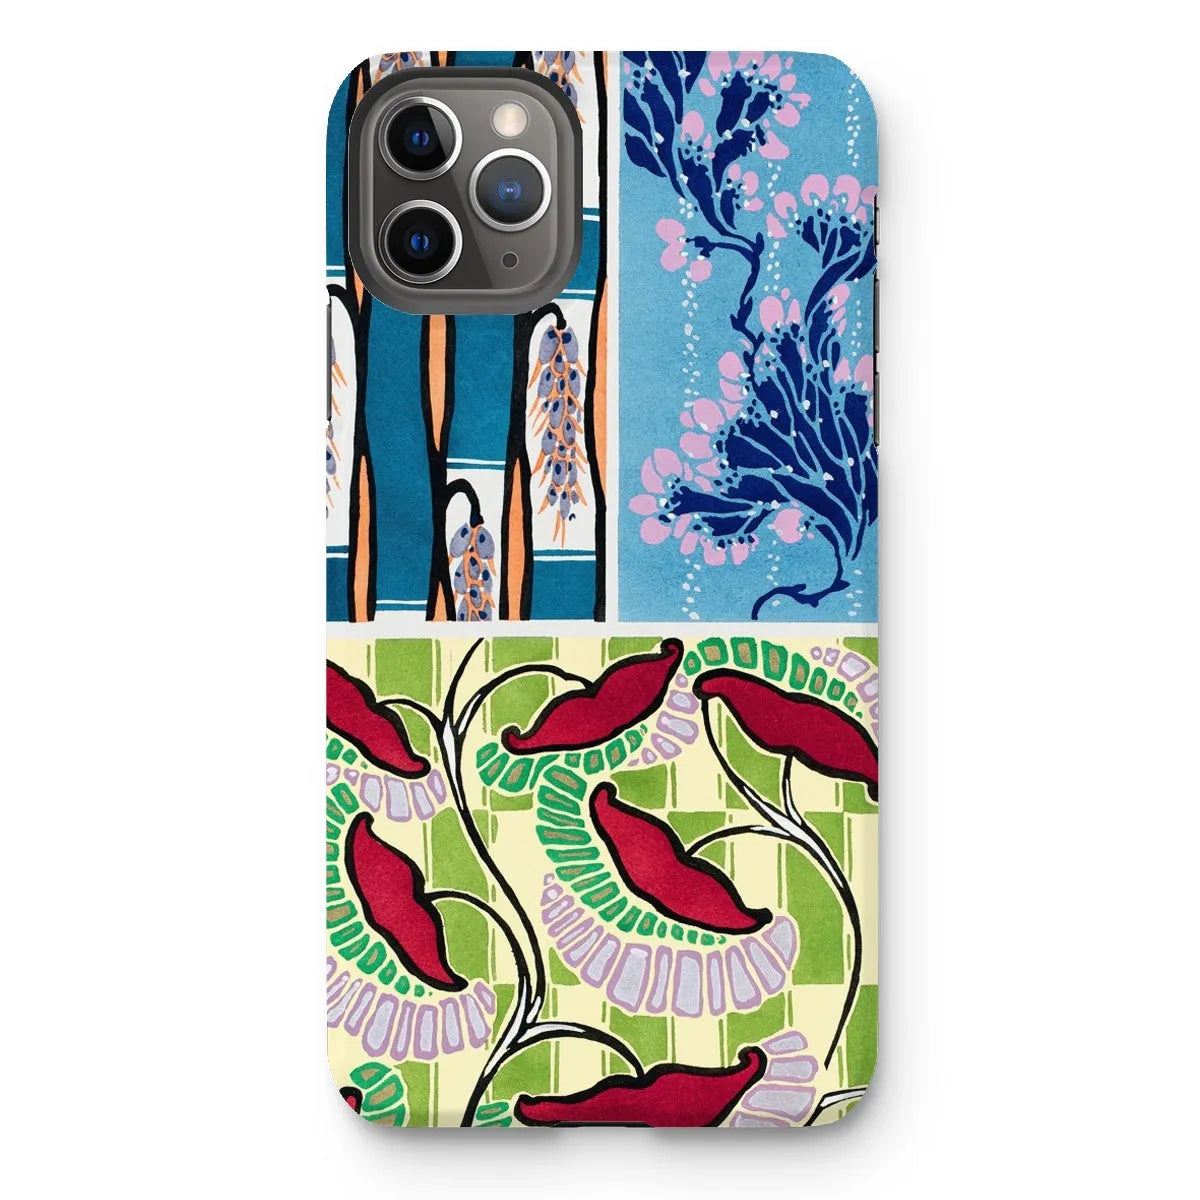 Floral Kitsch Aesthetic Art Phone Case - E.a. Séguy - Iphone 11 Pro Max / Matte - Mobile Phone Cases - Aesthetic Art